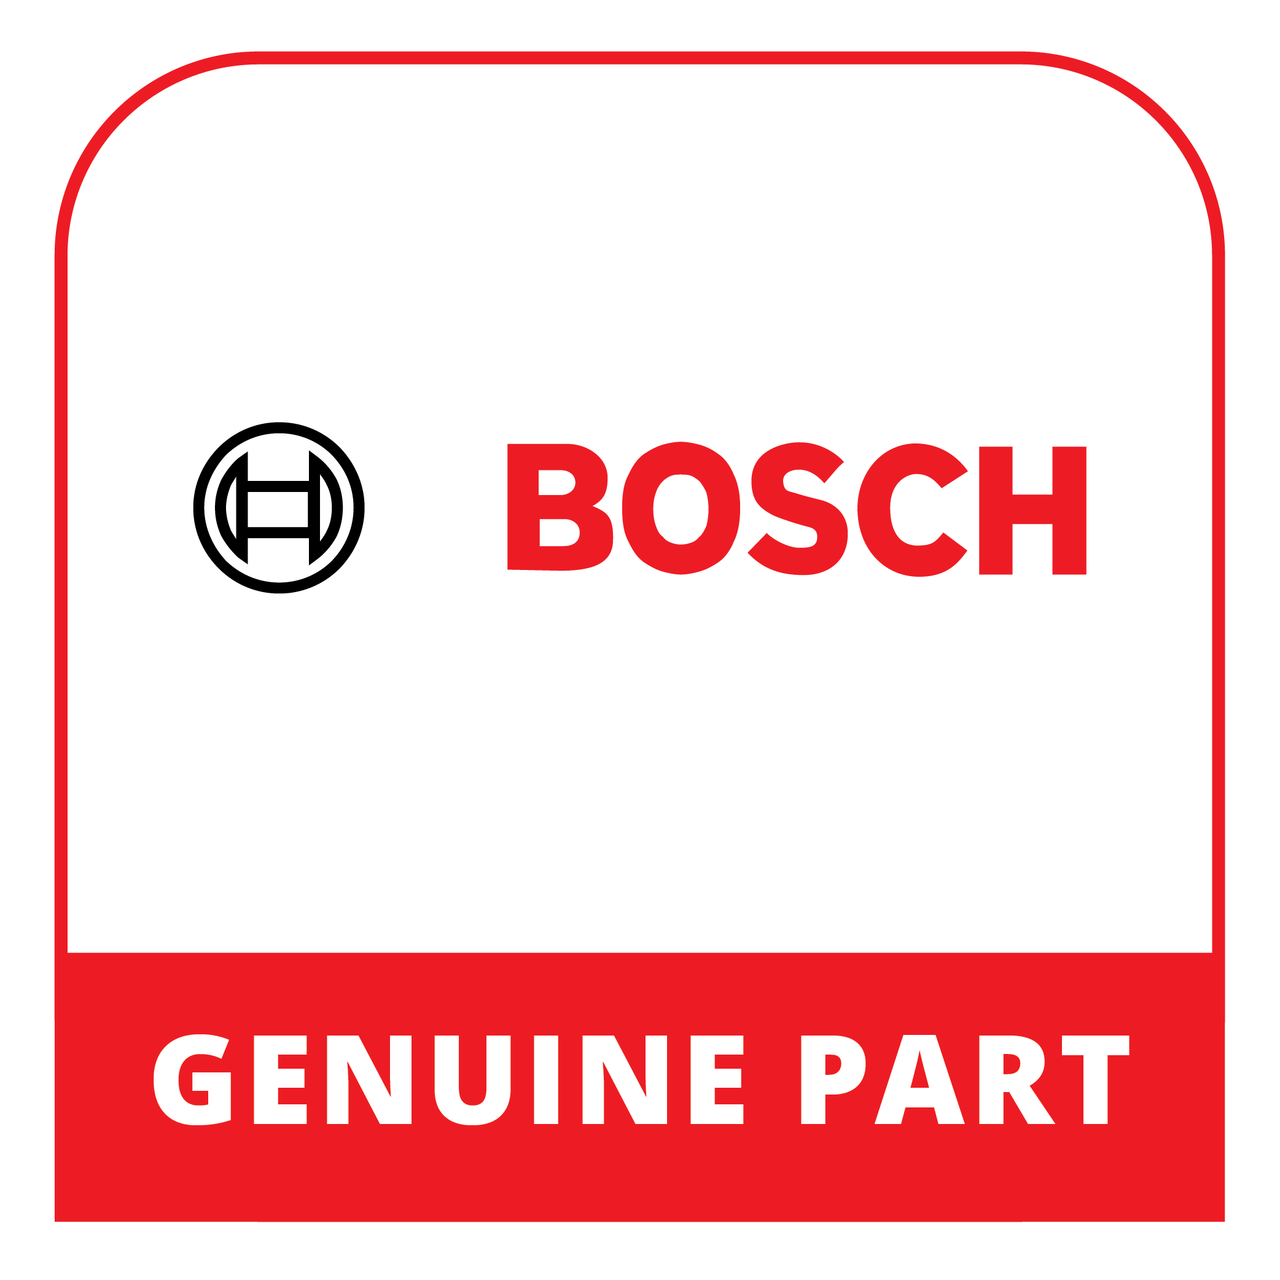 Bosch (Thermador) 18078463 - Installation Instructions - Genuine Bosch (Thermador) Part